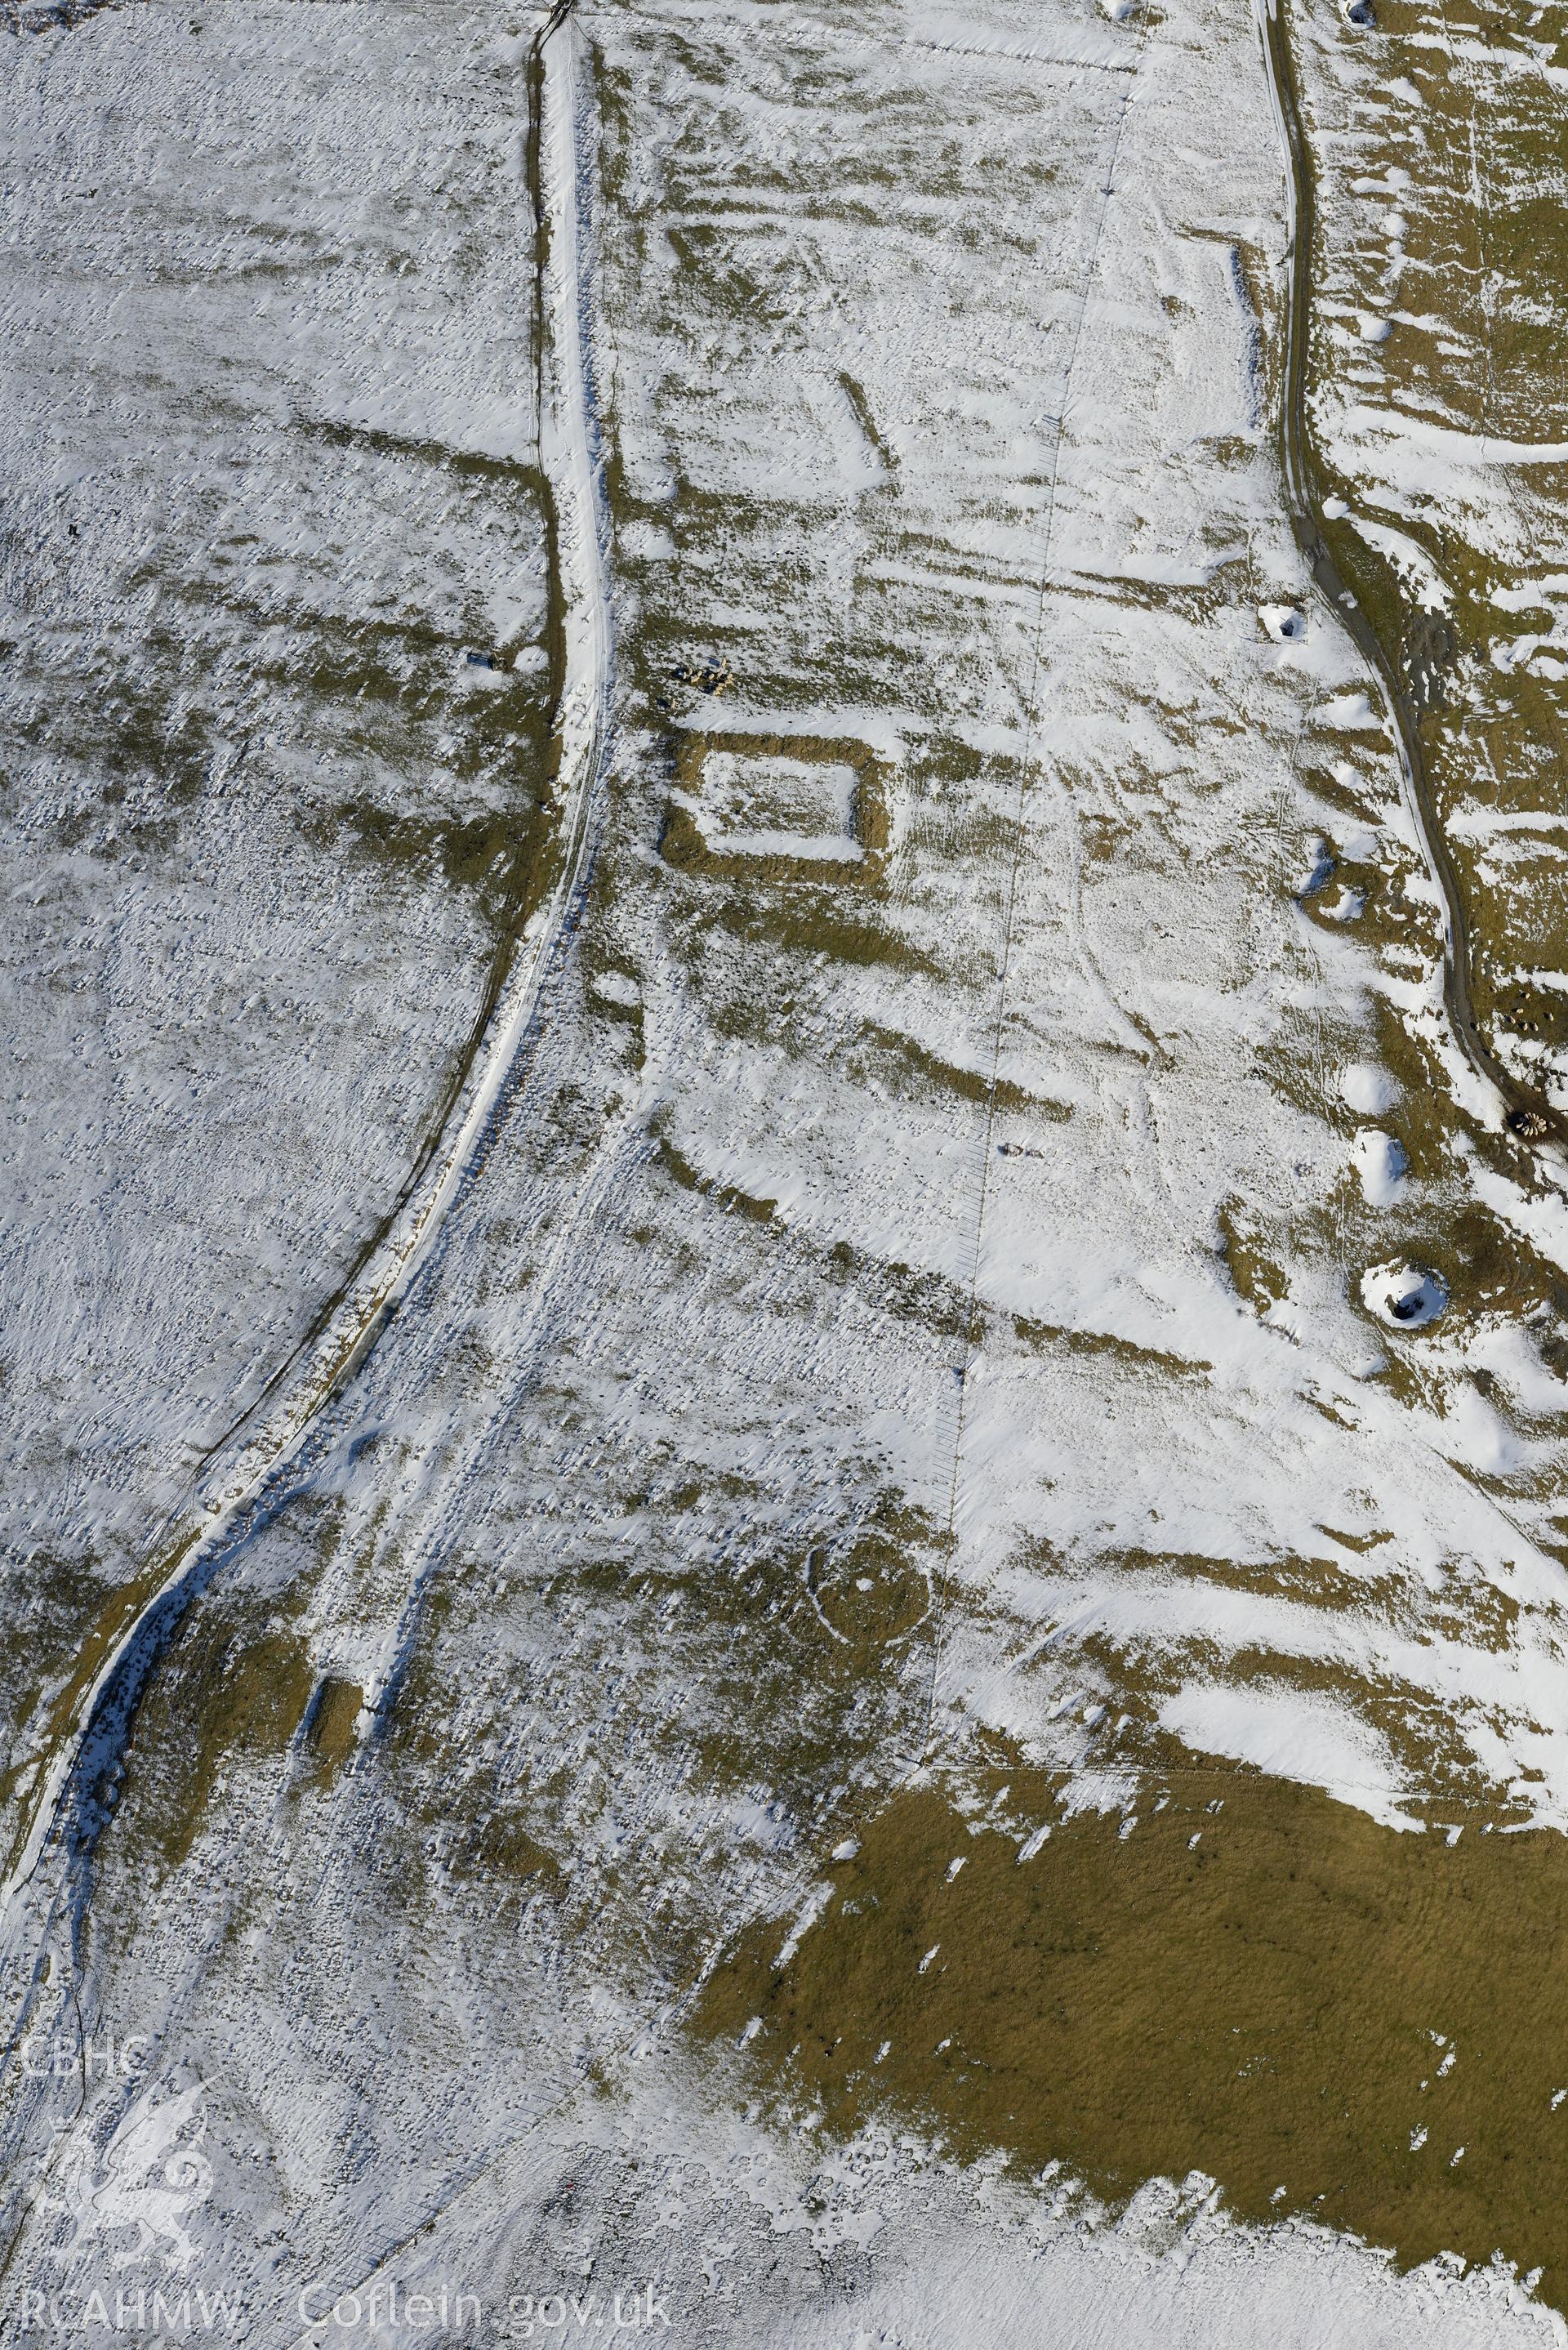 Pen y Crocbren Roman military settlement and gibbet mound, south west of Dylife, Machynlleth. Oblique aerial photograph taken during the Royal Commission's programme of archaeological aerial reconnaissance by Toby Driver on 4th February 2015.